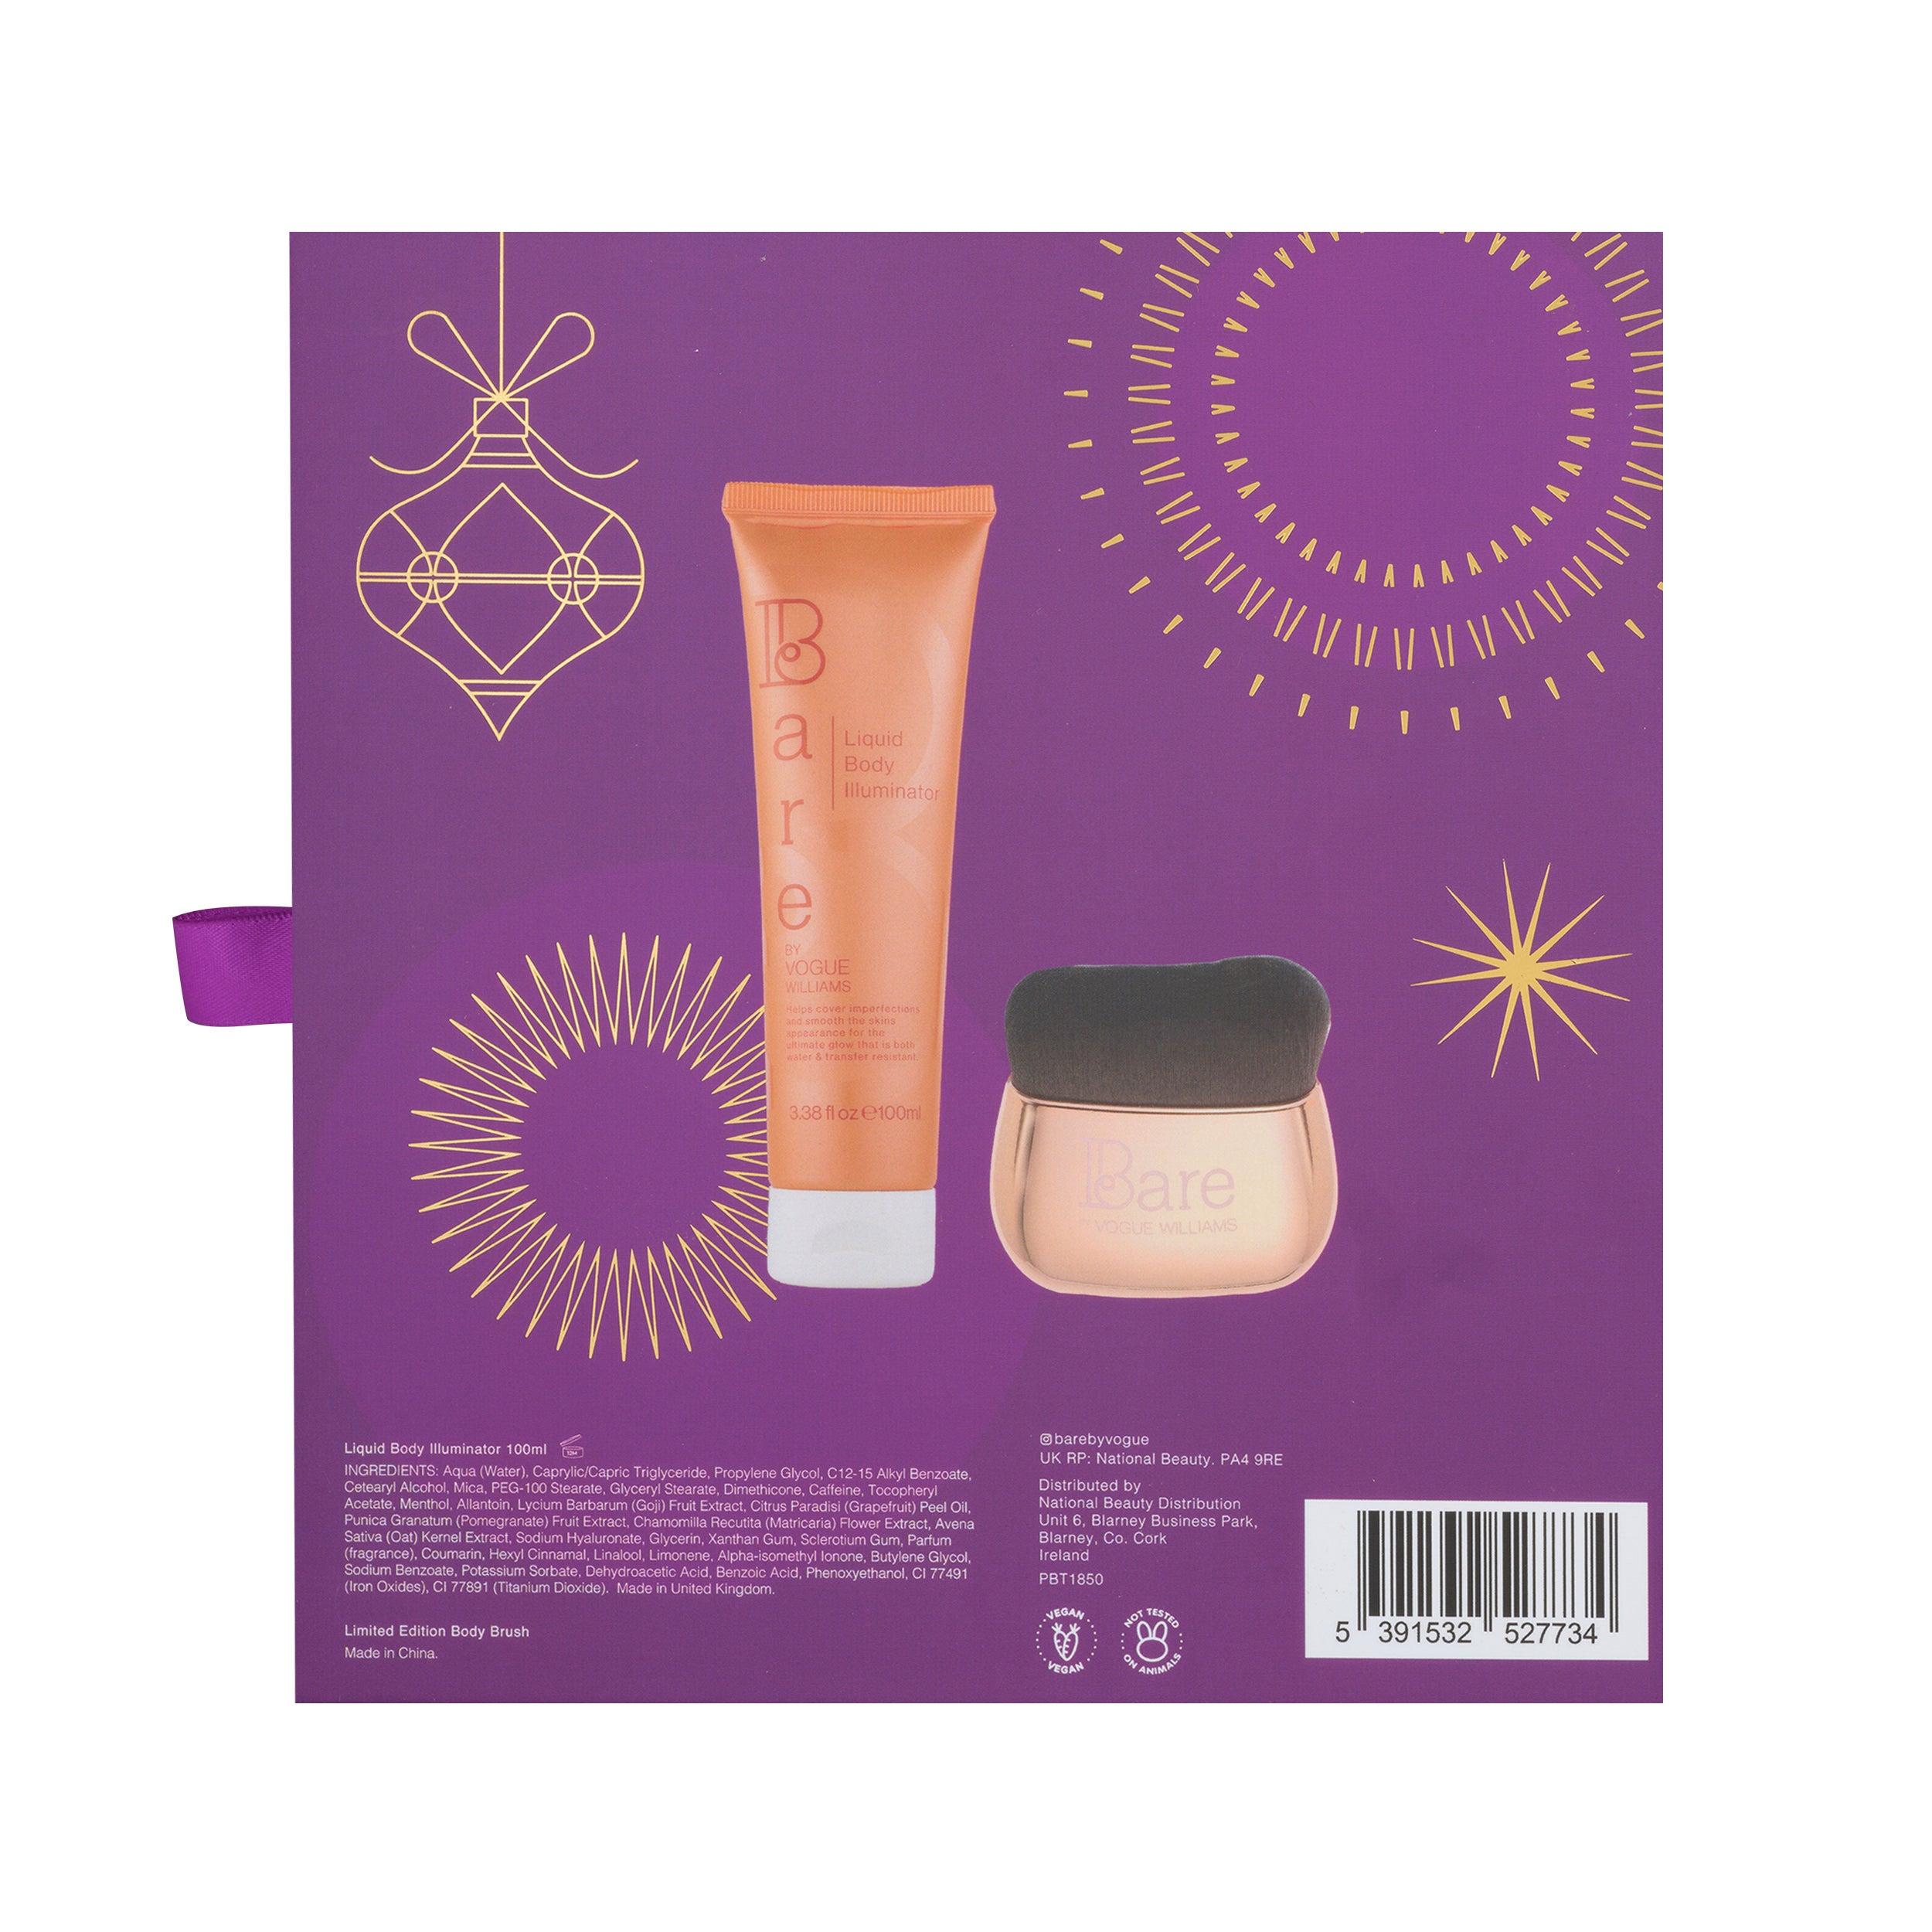 Bare by Vogue Body Glow Kit